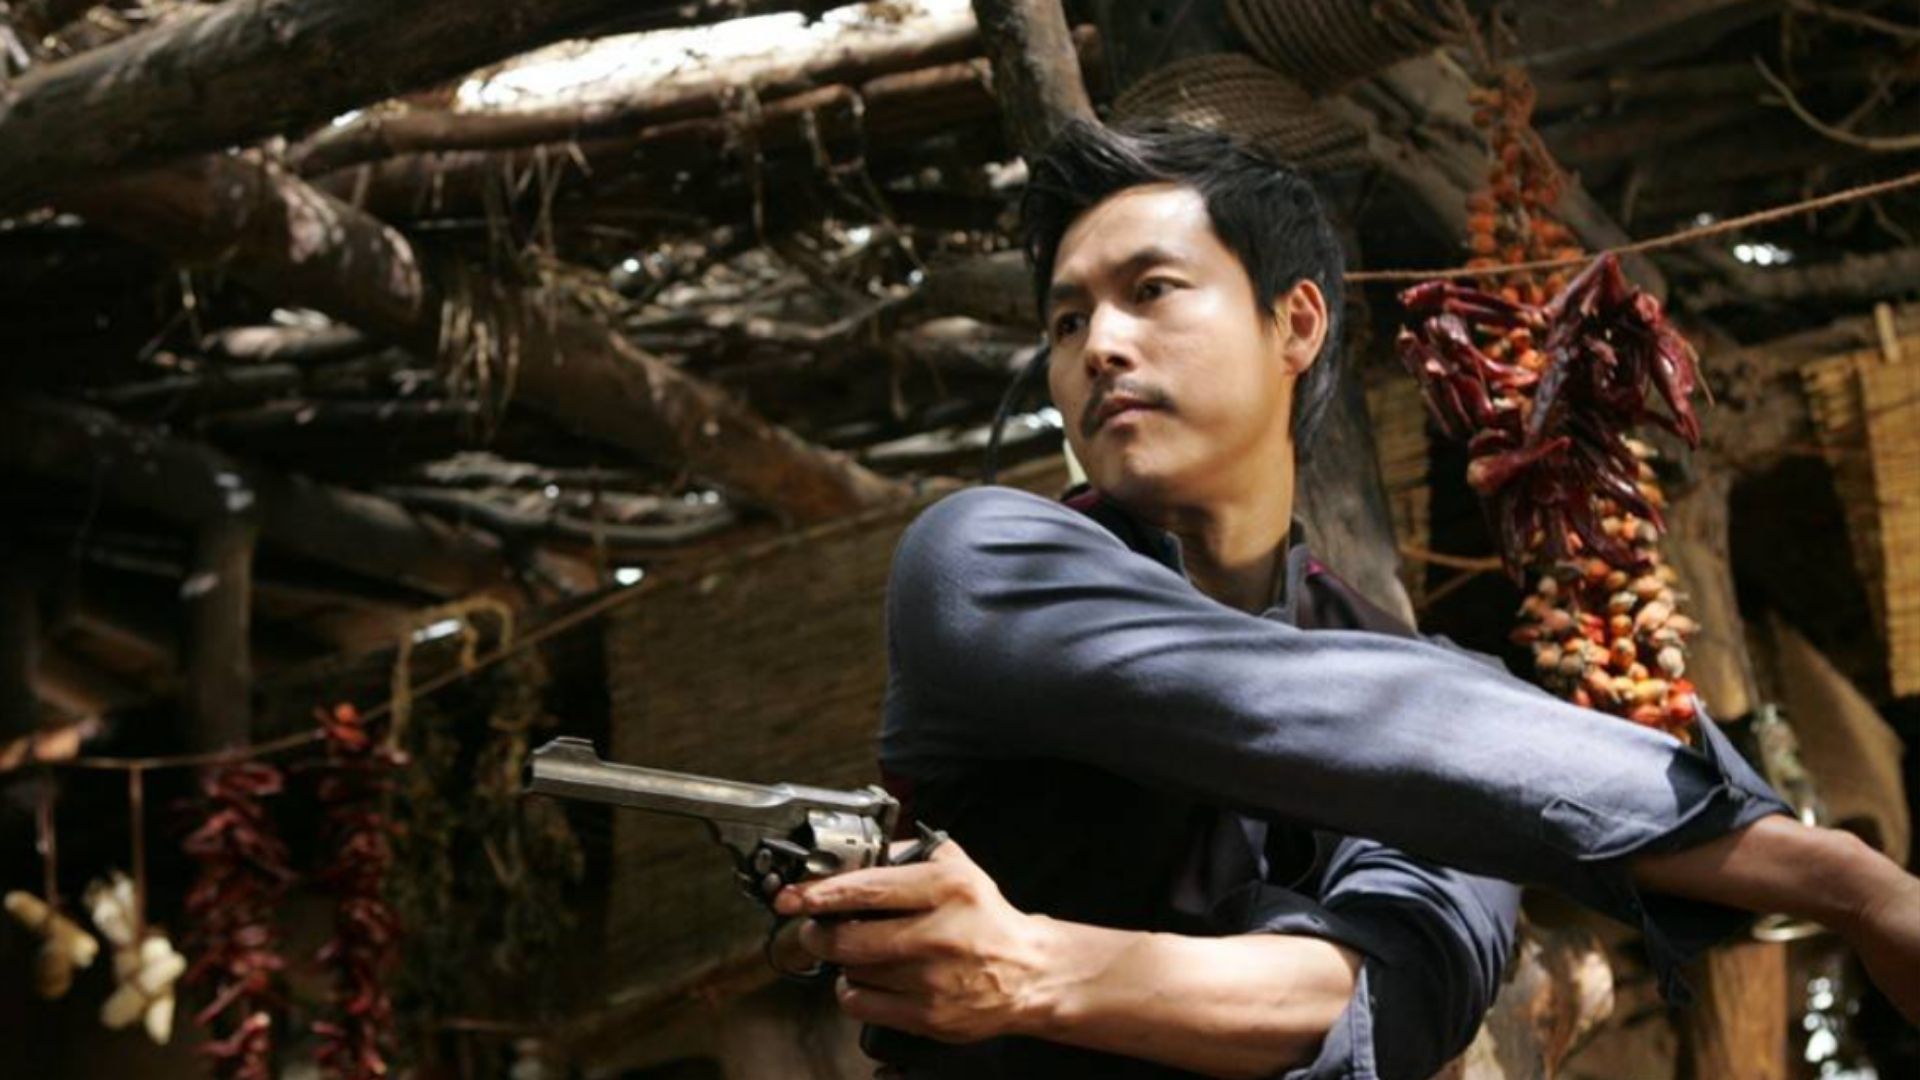 (2) The Good, the Bad, the Weird_JUNG Woo-sung (W)